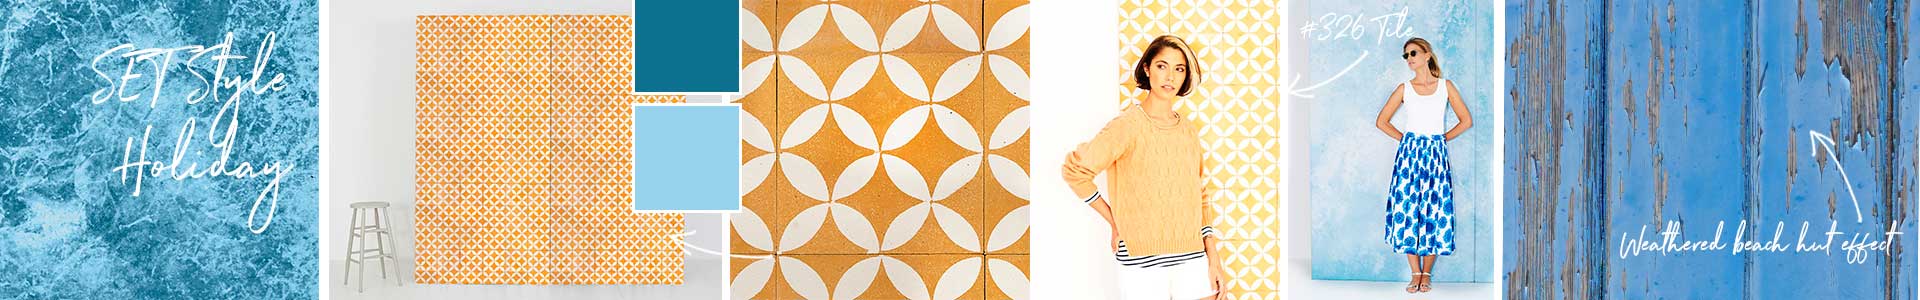 Printed Textures | Tile Surfaces